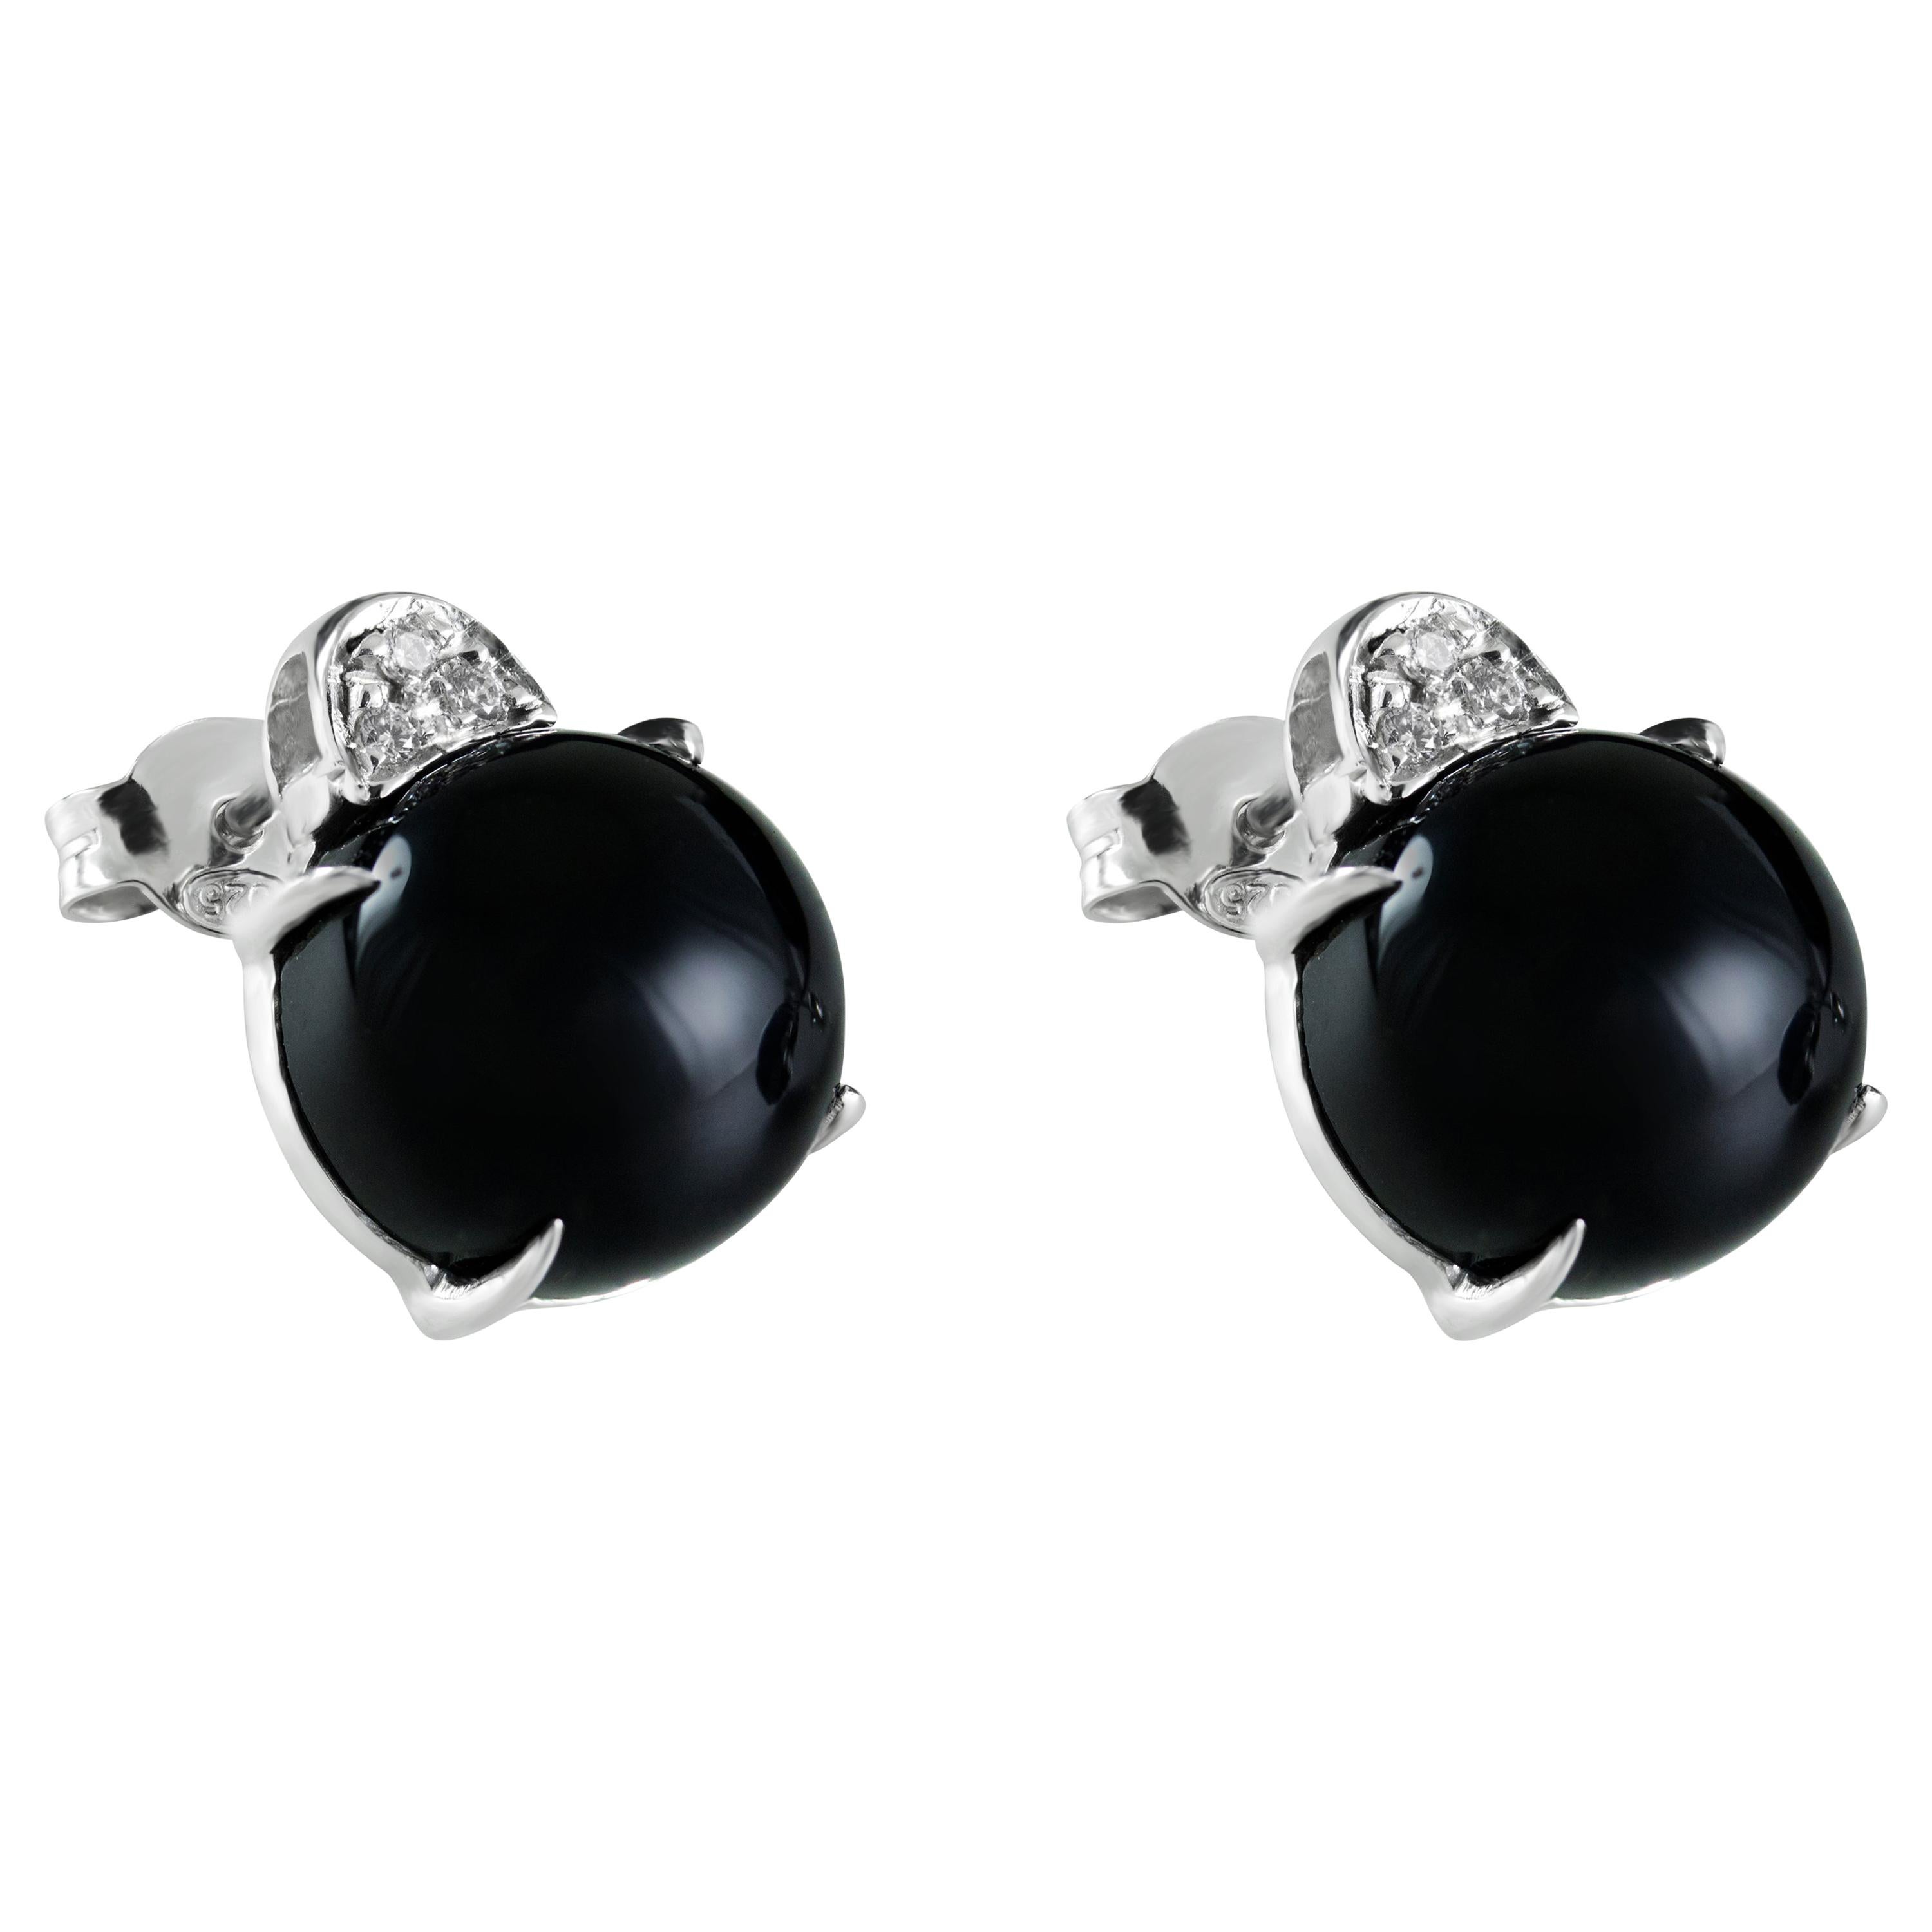 Black Agate and White Diamond Stud Made in Italy Earrings